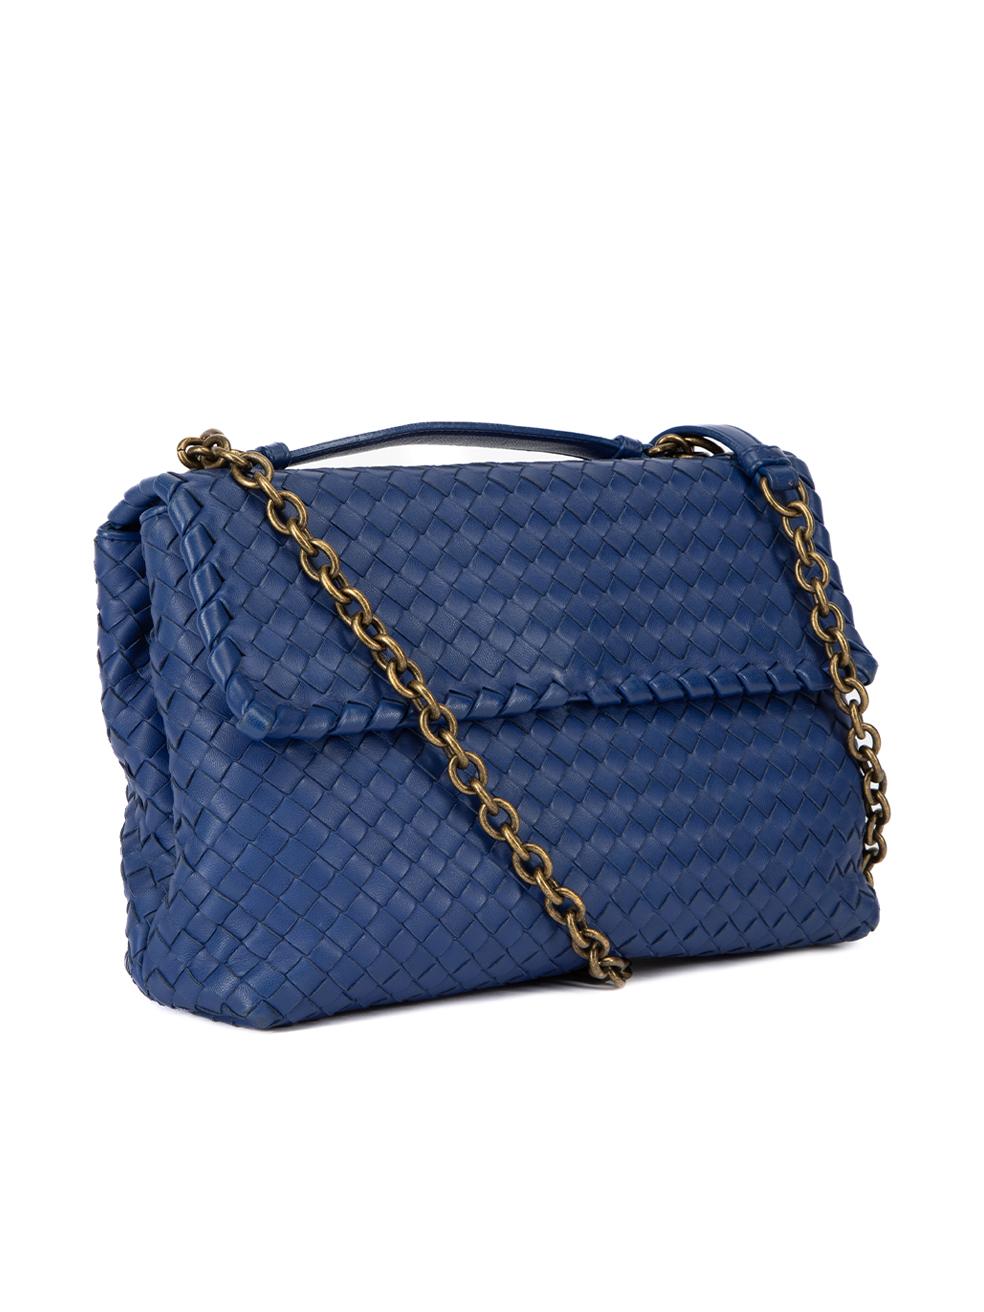 CONDITION is Very good. Minimal wear to Botegga Veneta is evident. Minimal wear to the leather exterior where scuffs can be seen. There is also wear to the bag chain on this used Bottega Veneta designer resale item. This item includes the original